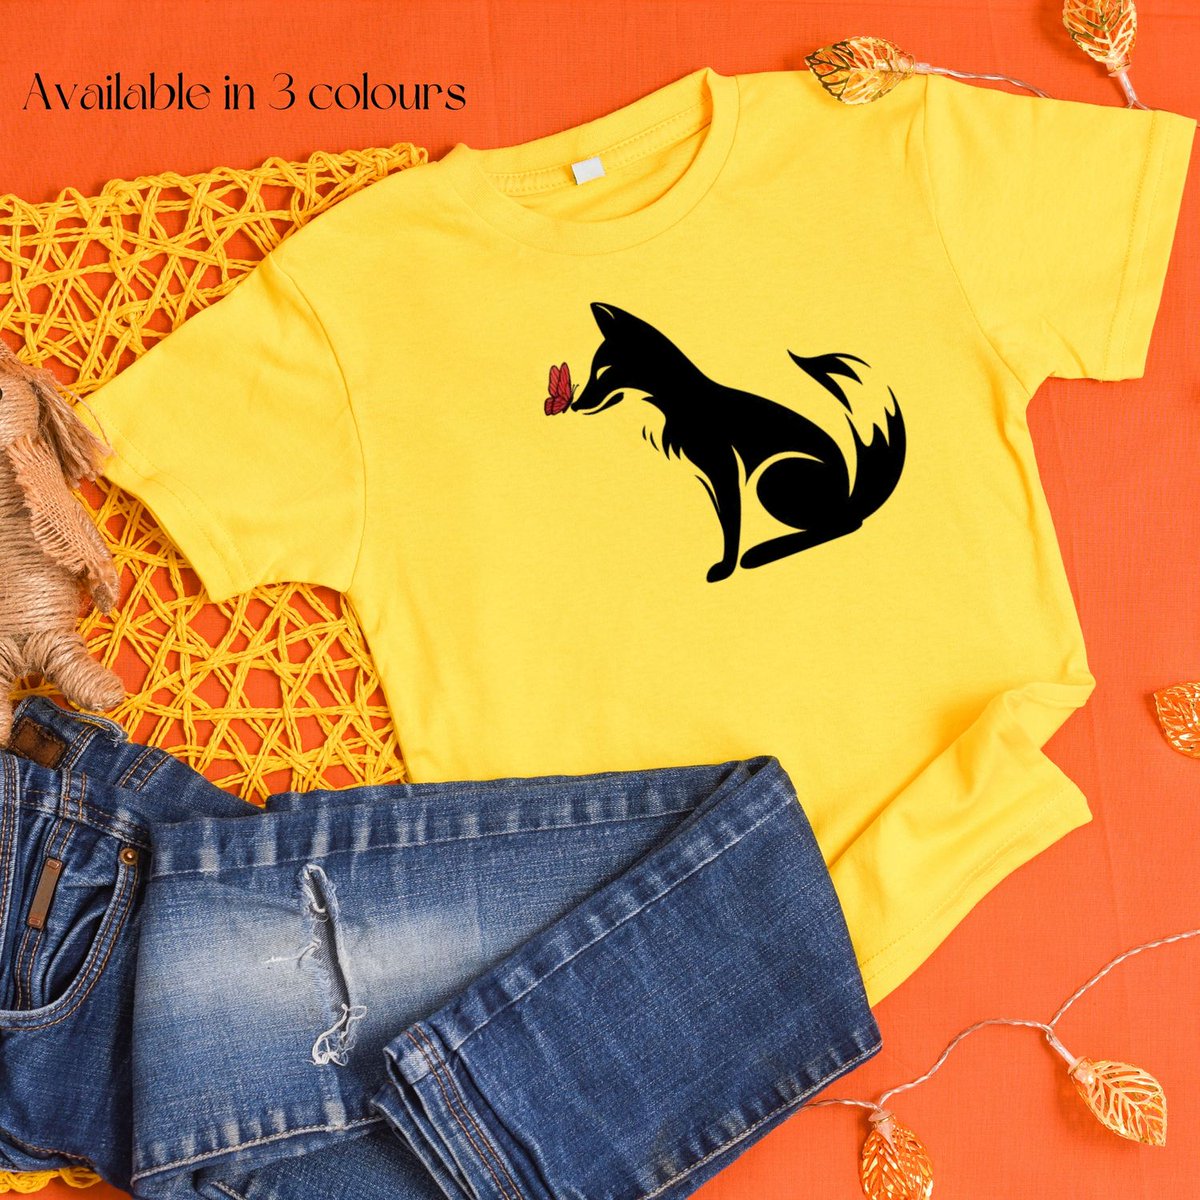 Good morning have a wonderful day. A reminder that there is still 20% off everything including this fabulous fox design.
#MHHSBD #shopindie #EarlyBiz